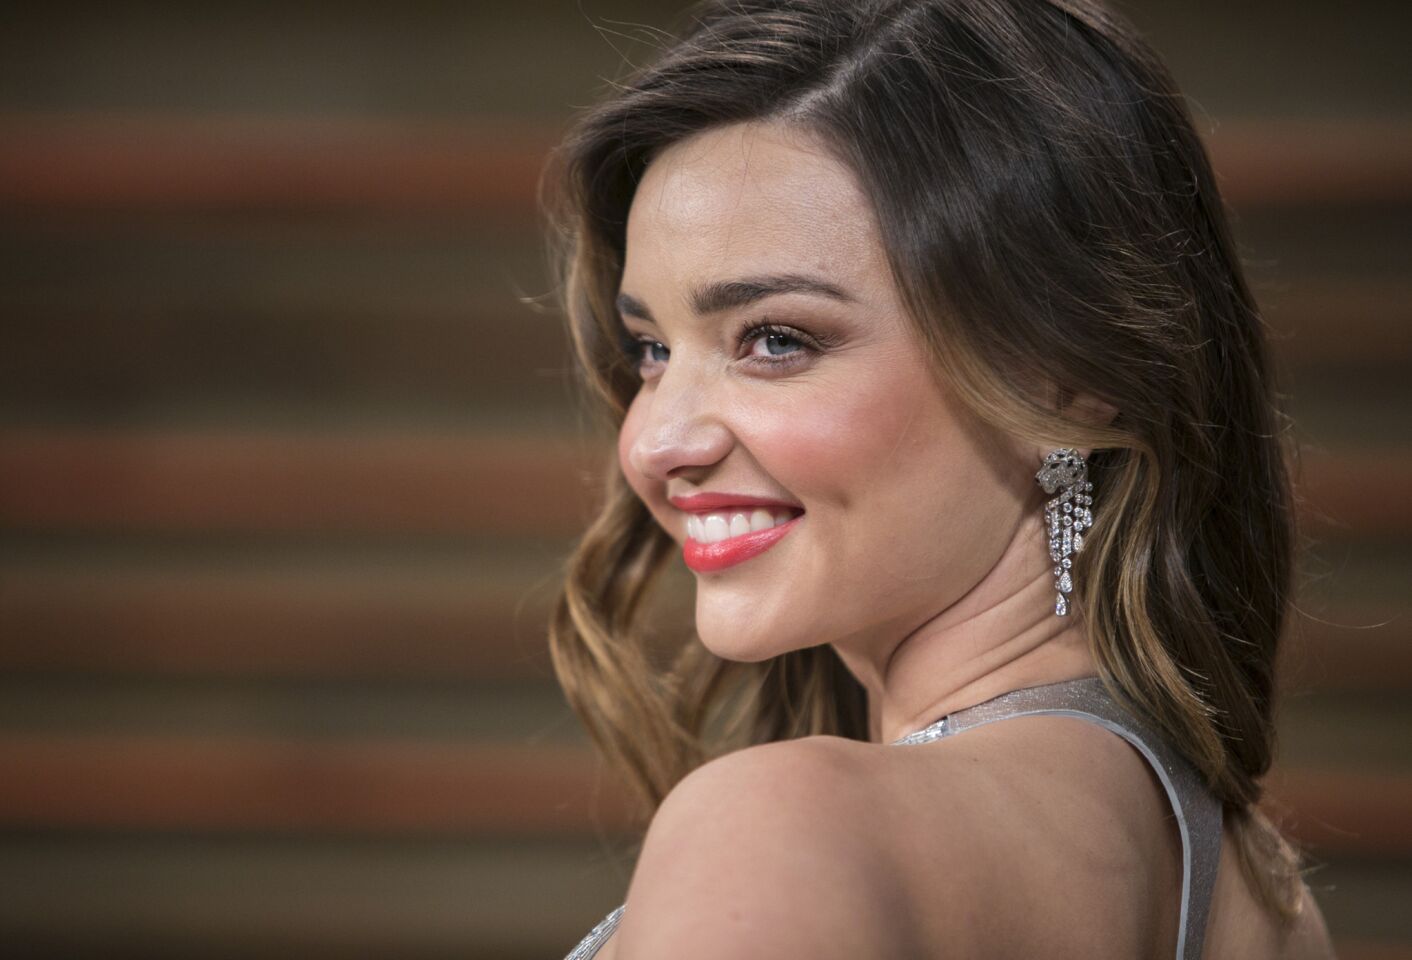 Victoria's Secret model Miranda Kerr, no stranger to showing some skin, experienced an unforeseen fashion mishap on the set of her skin-care line's ad campaign. Her chunky black sweater took a plunge, revealing both her breasts. Kerr was caught in a similar situation a few months later when a sheer black lace gown also gave way.